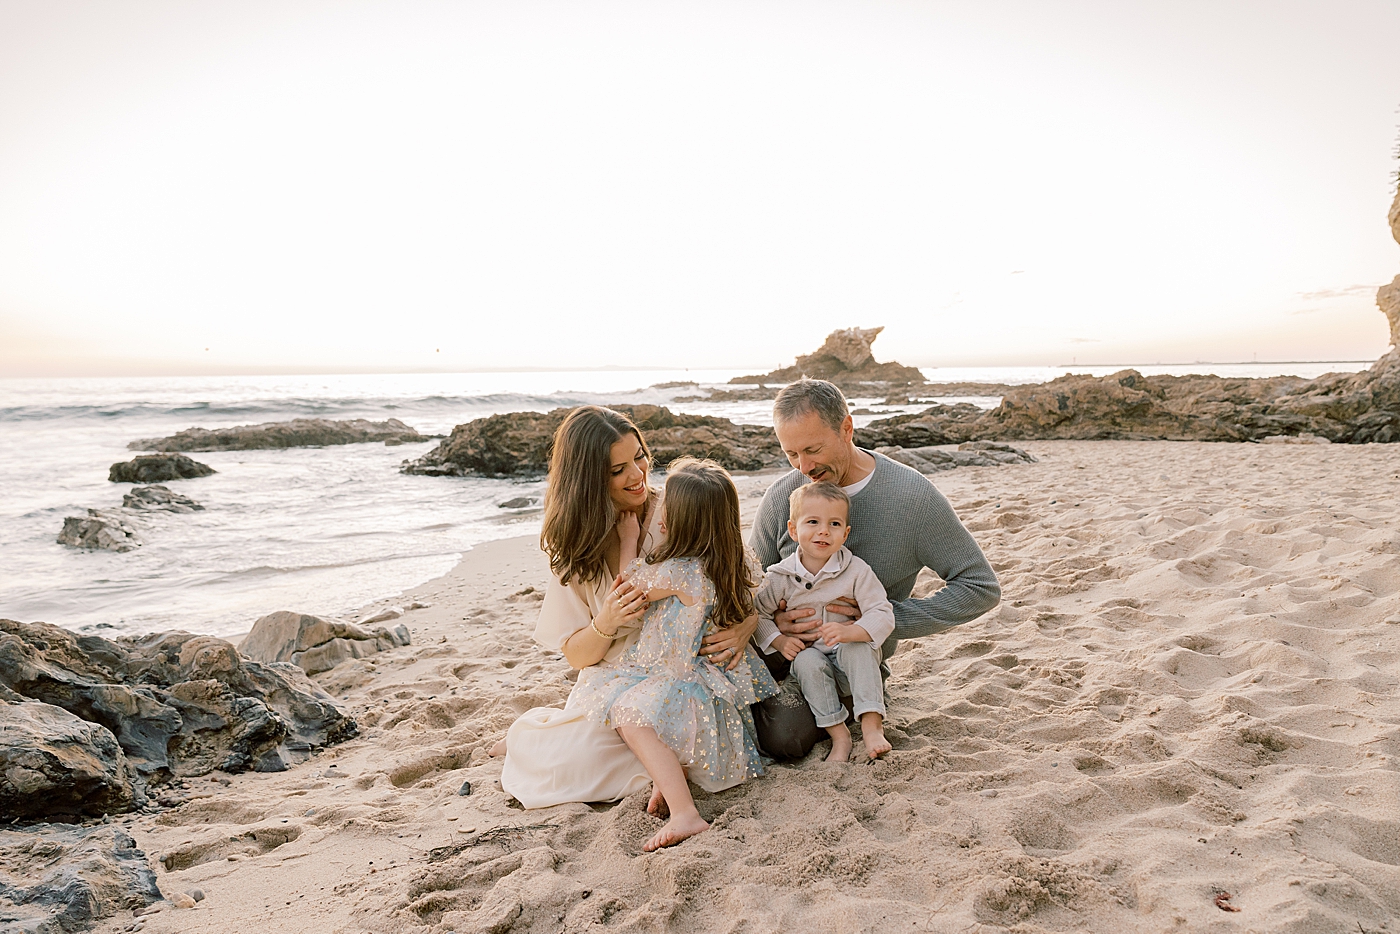 Family snuggling on the beach at sunset in California | Image by Halleigh Hill